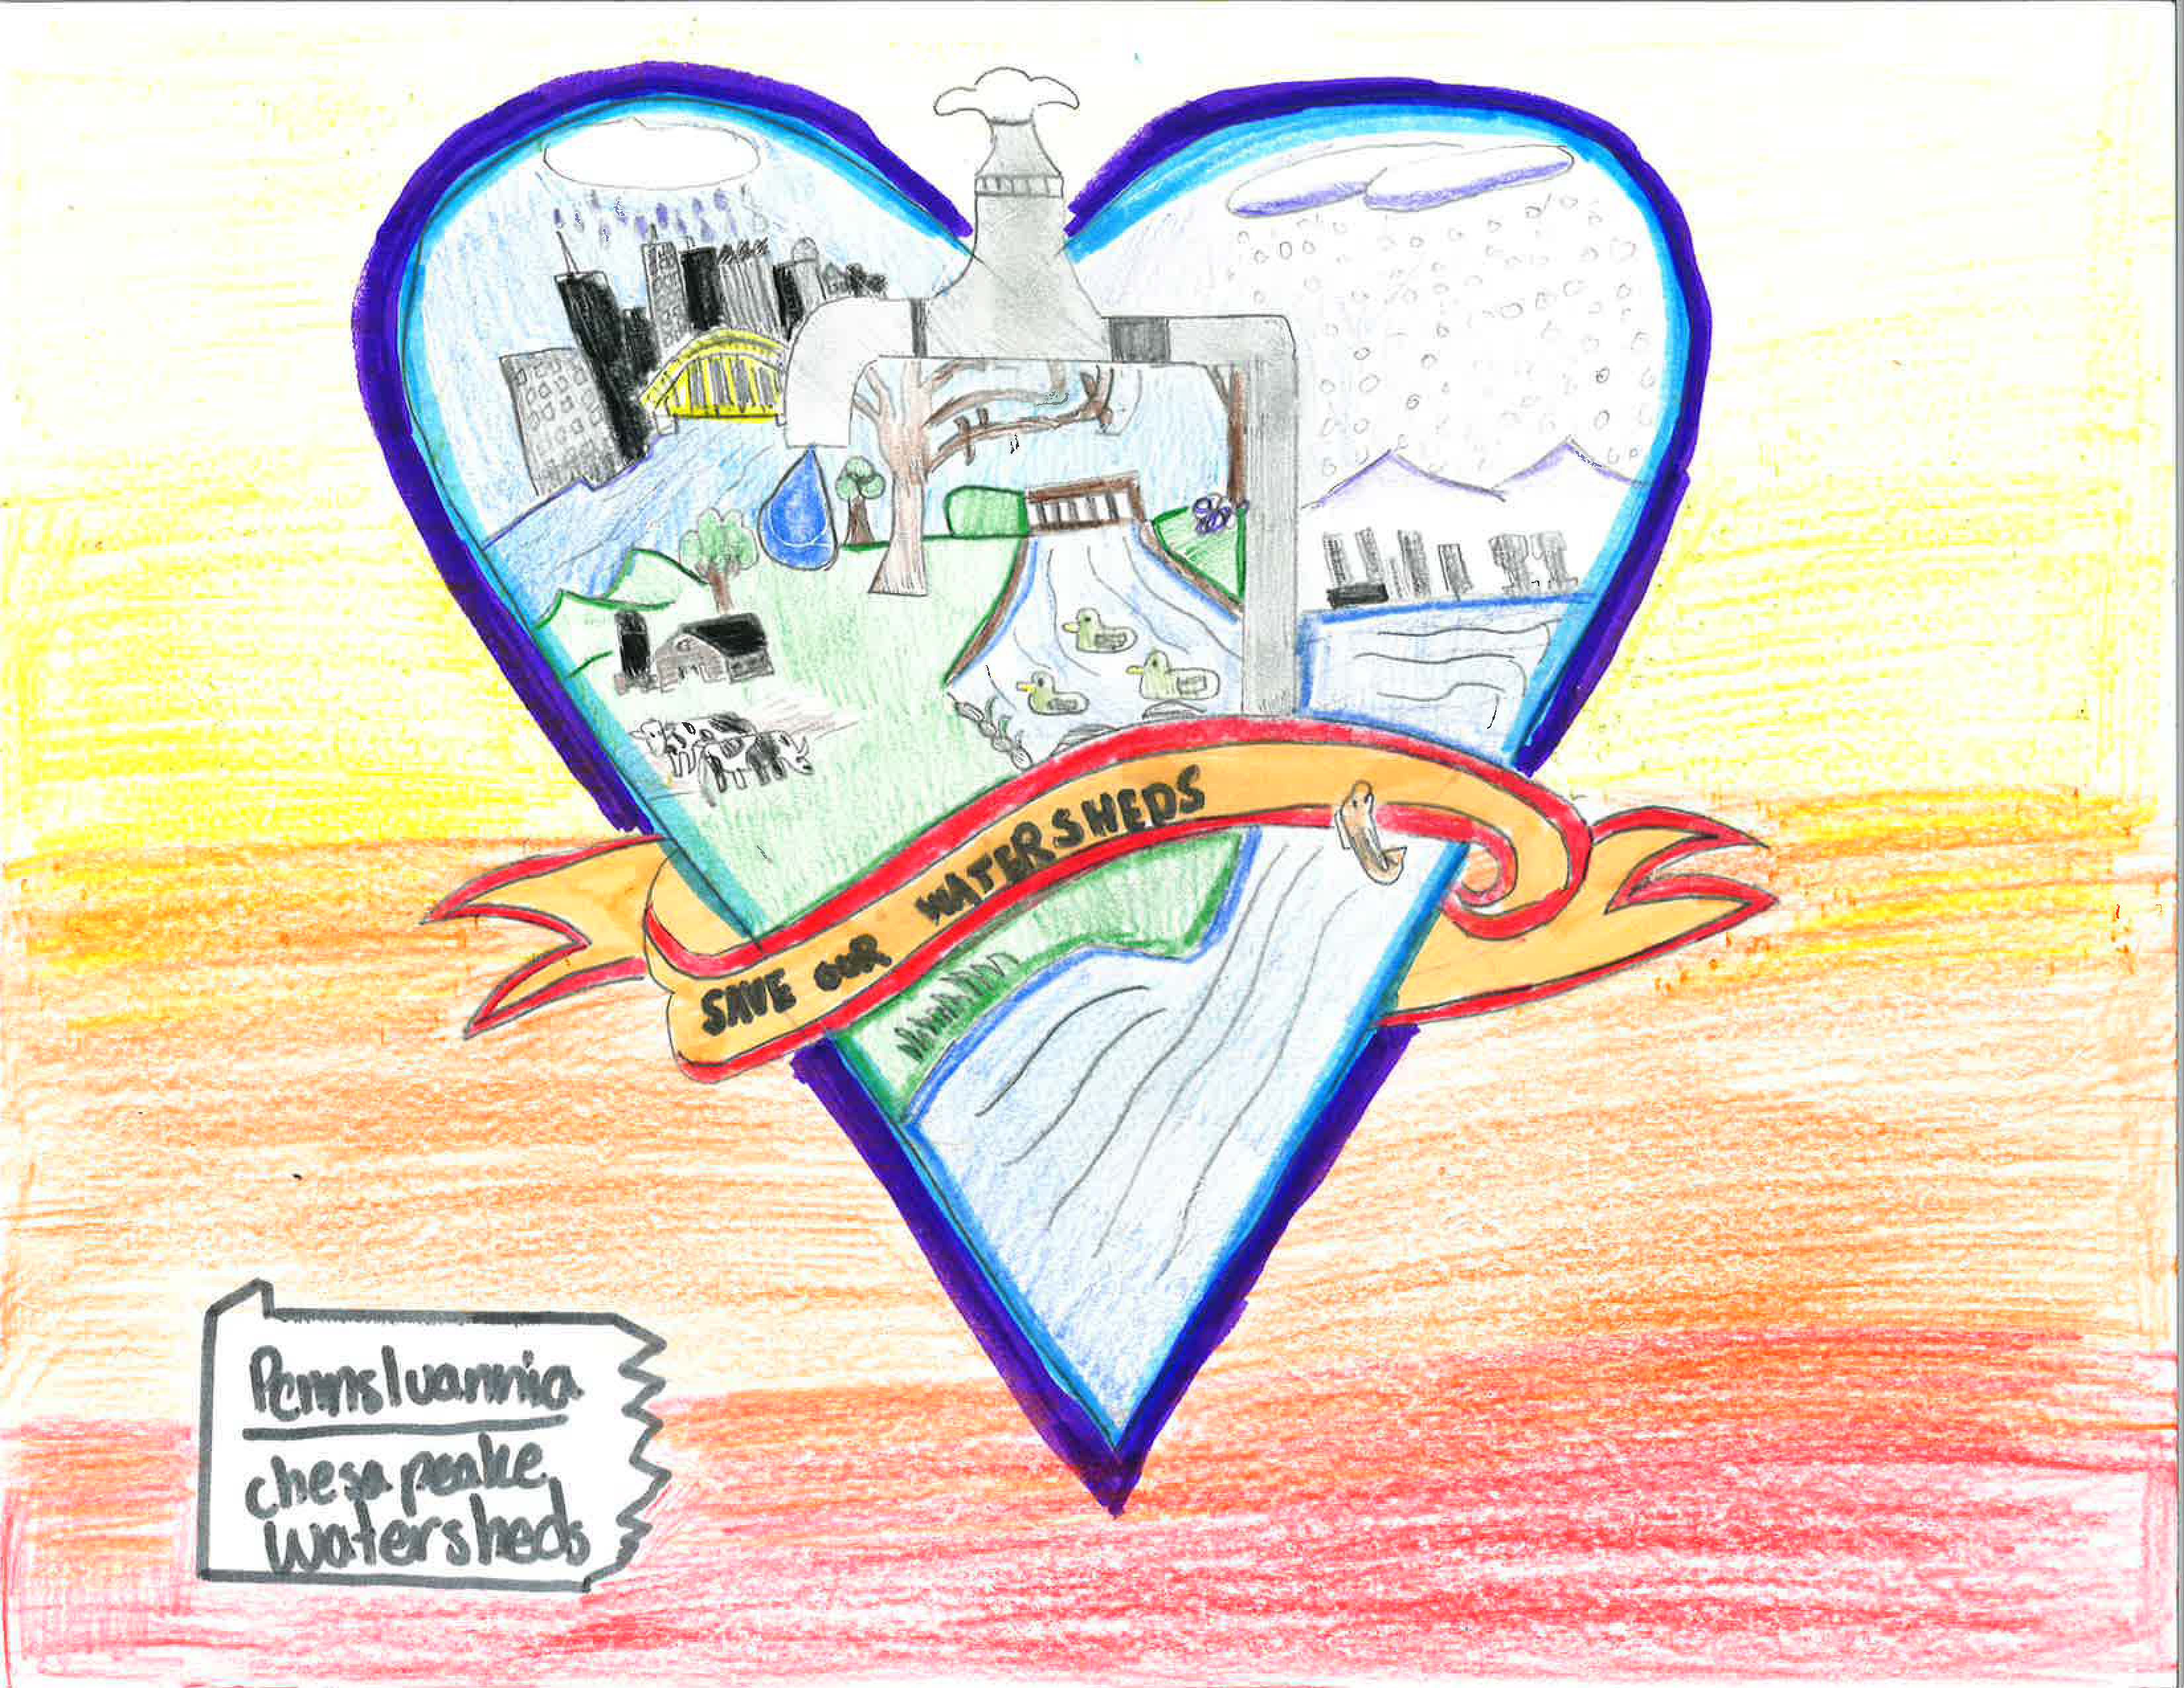 2022 PA Protect Watersheds Art Contest Grand Prize Winner